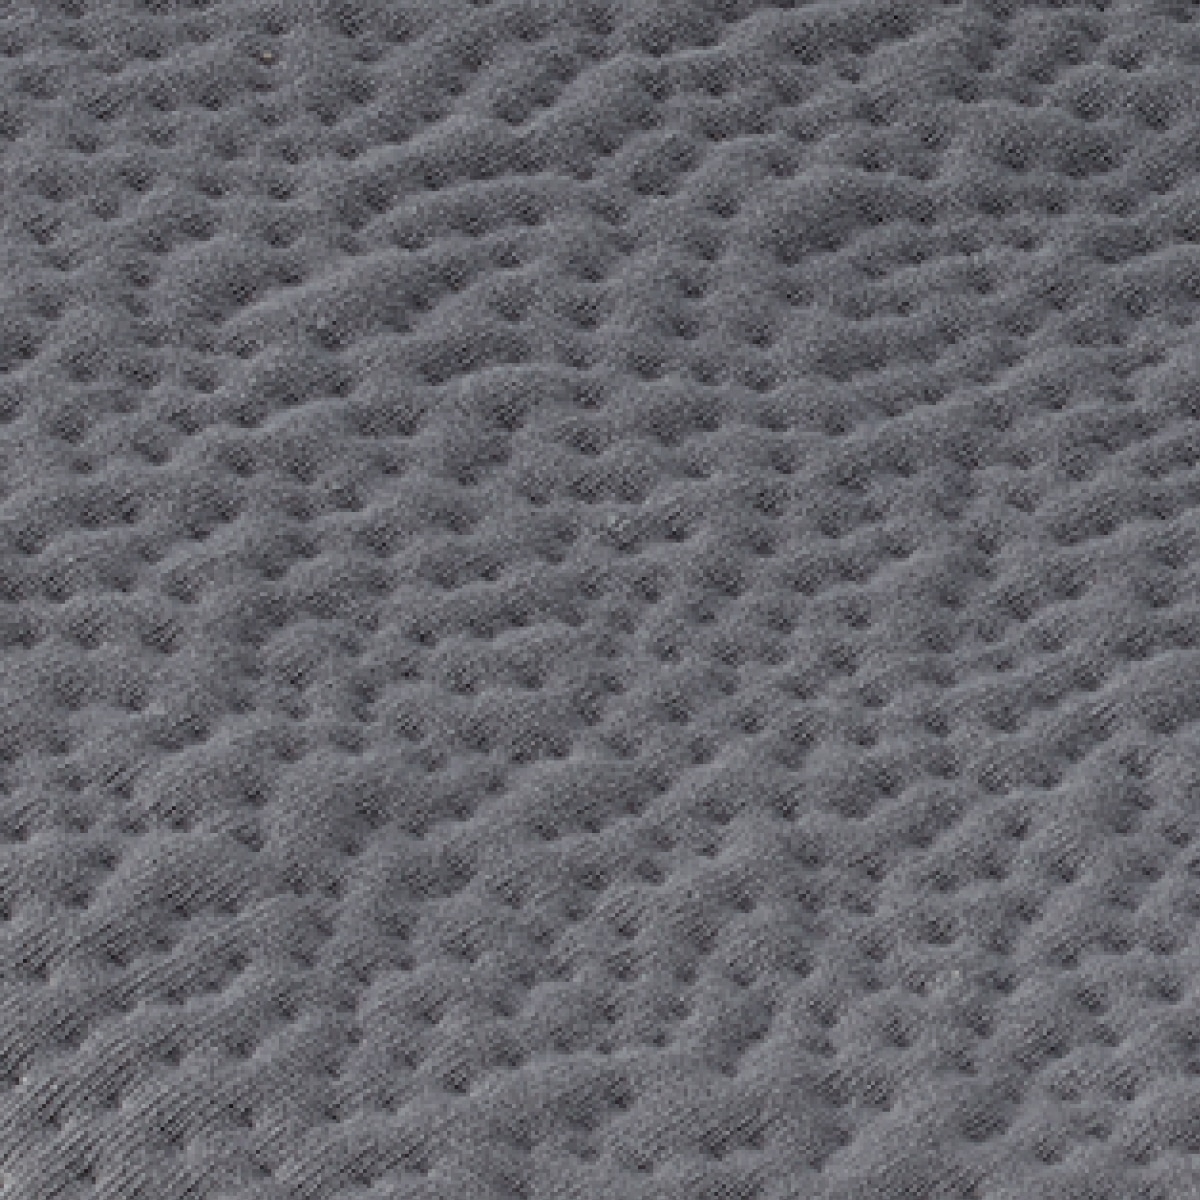 Close up view of the carbon knit seat pad